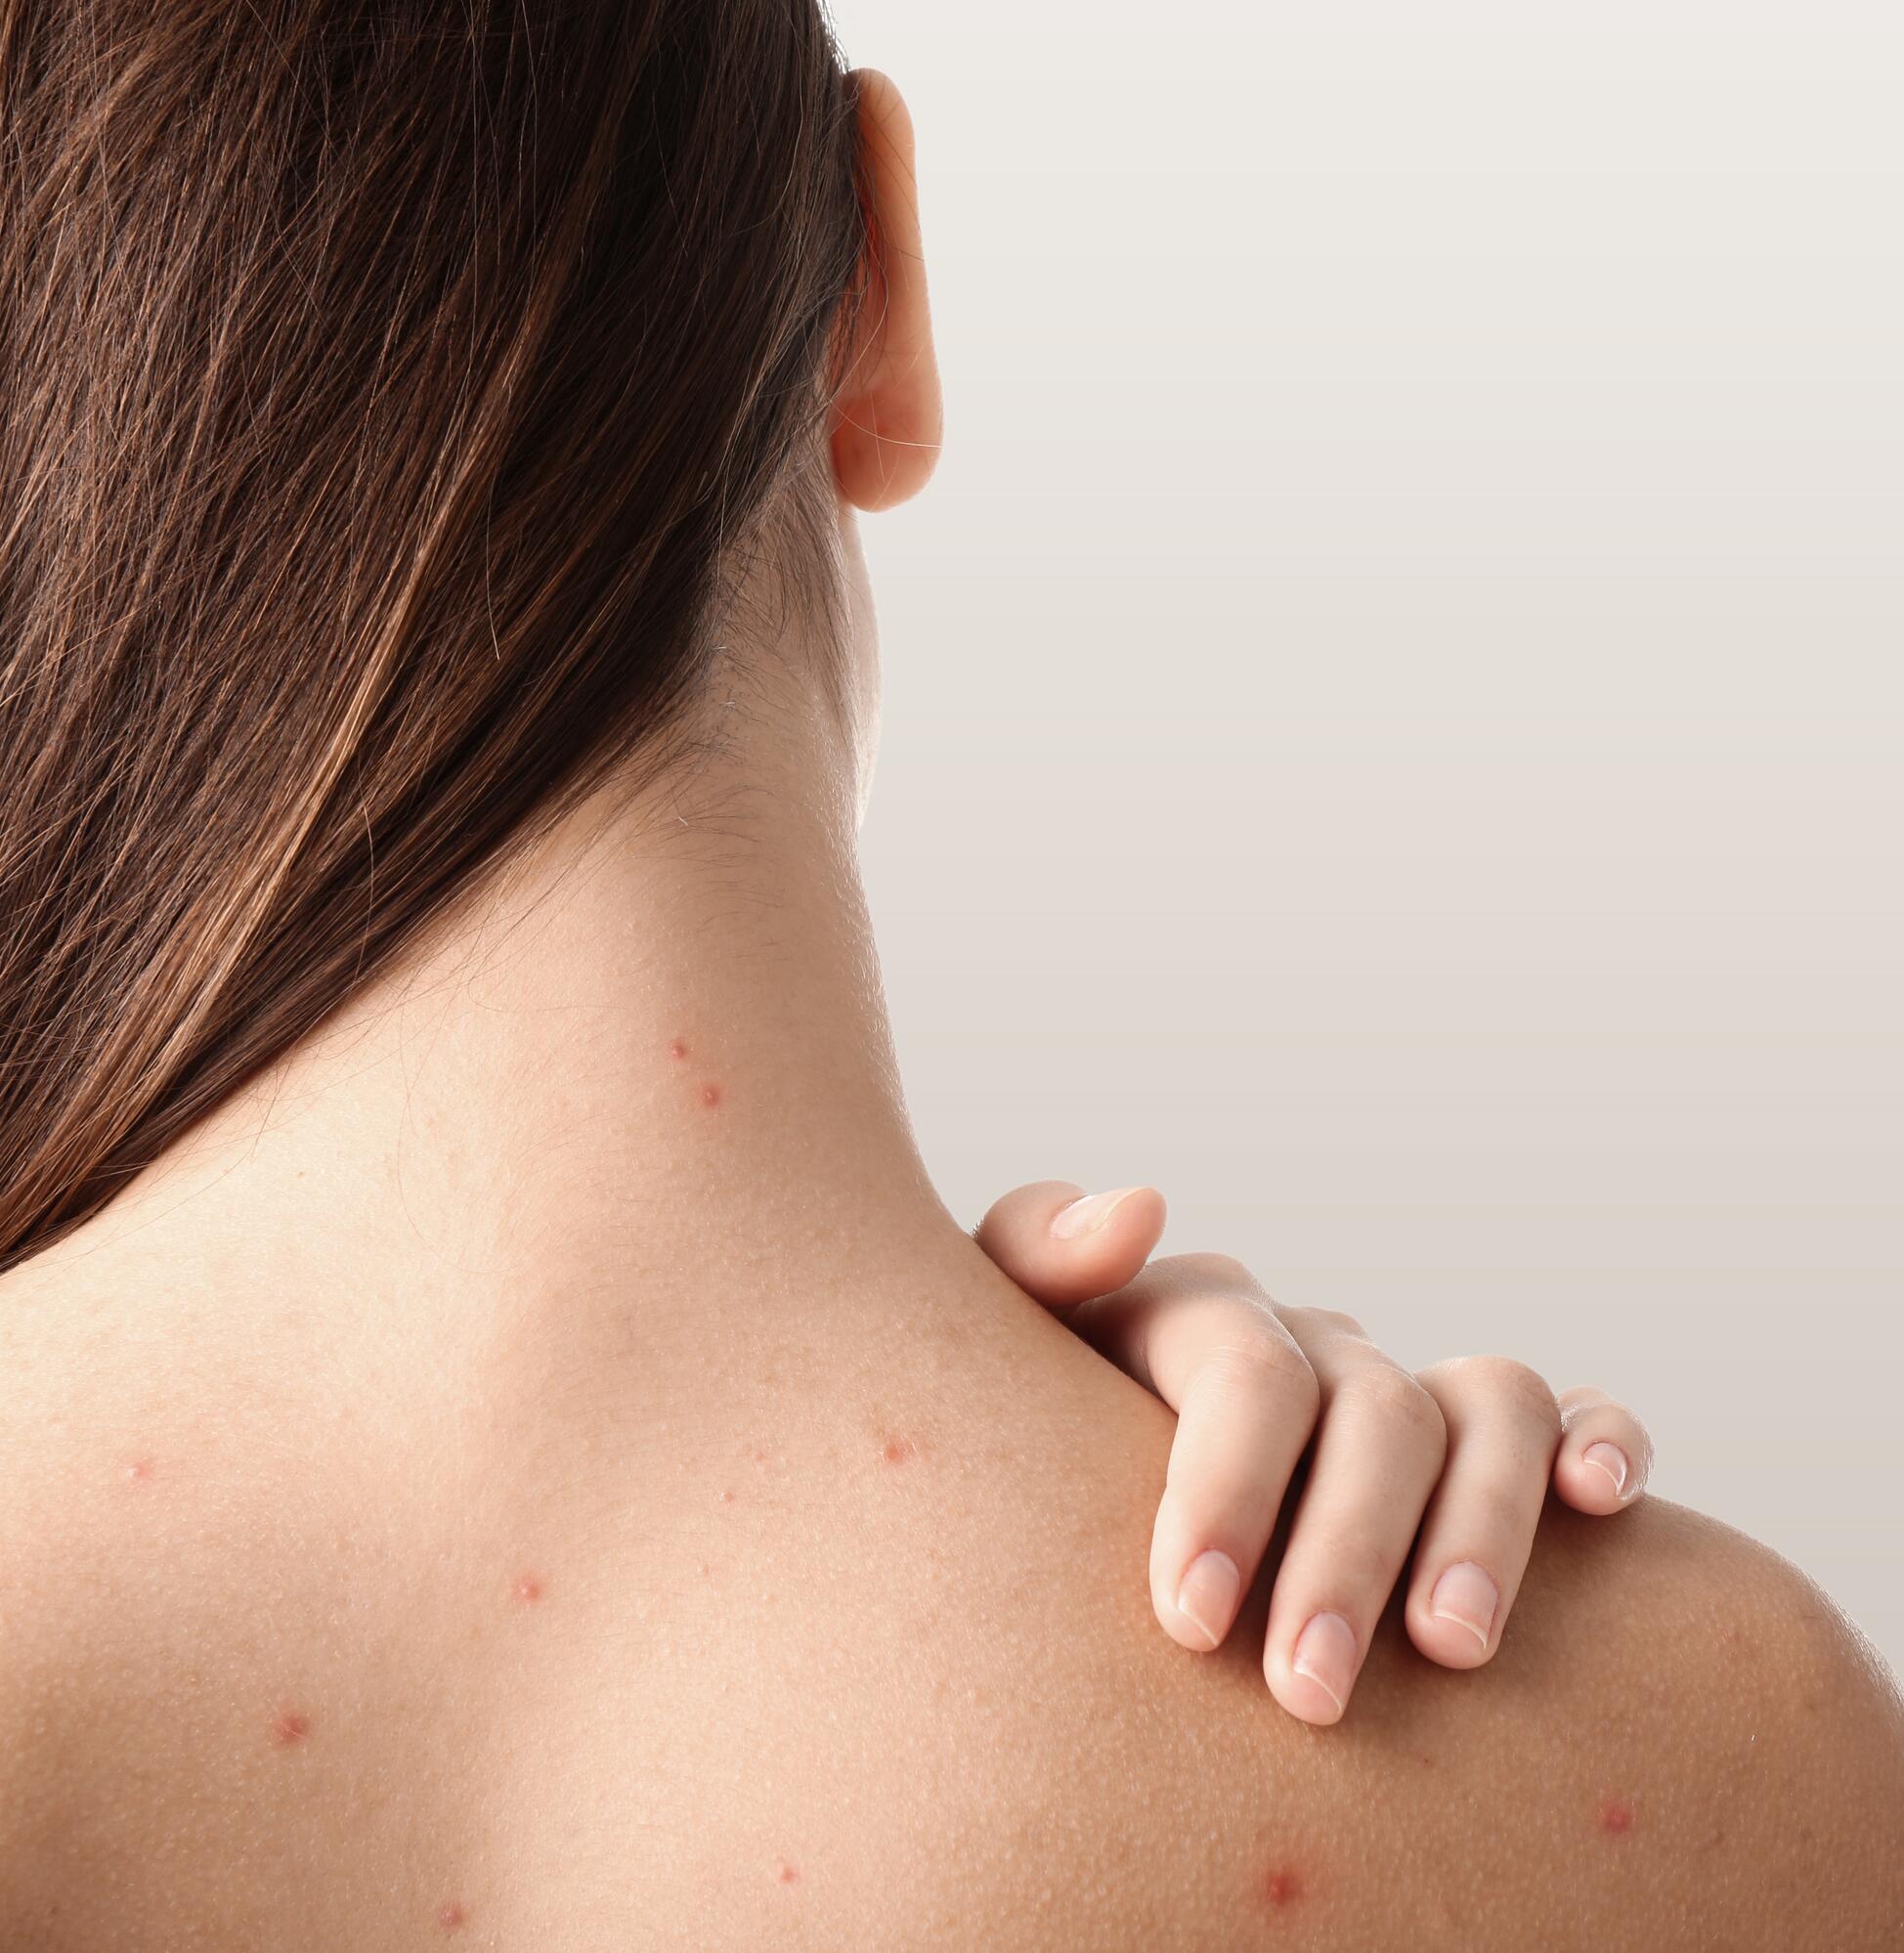 What is hormonal acne?